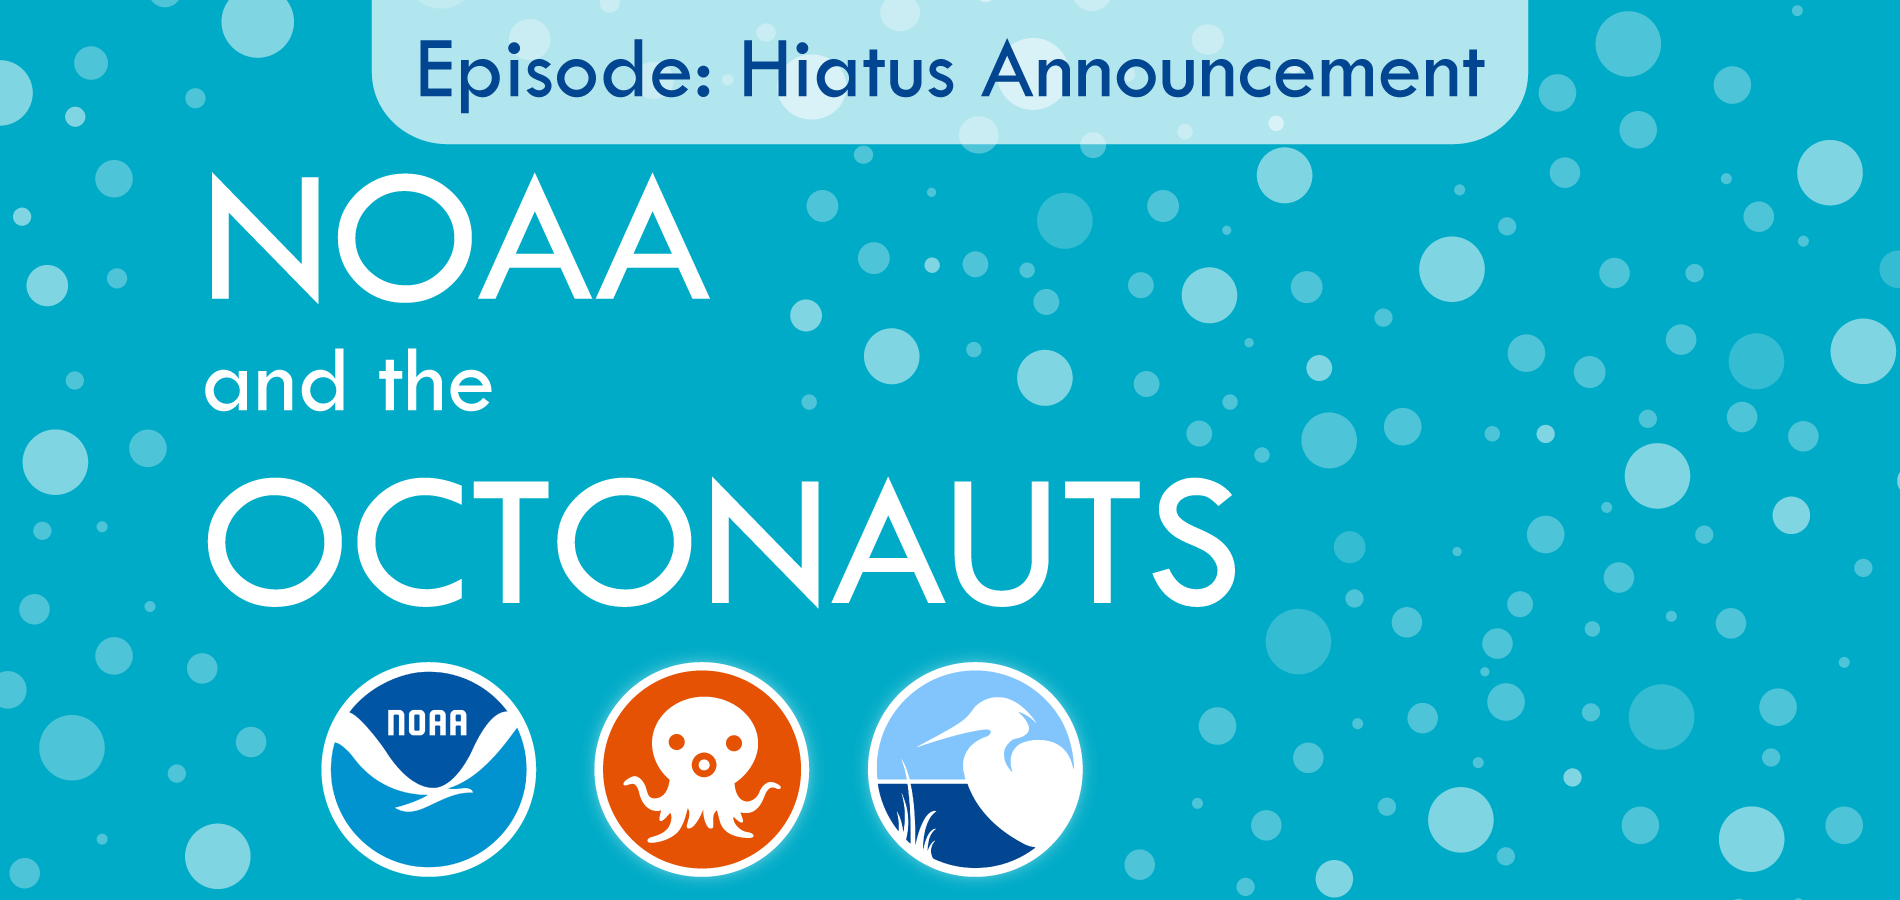 The words "NOAA and the Octonauts" are large amongst a teal background with white bubbles. The banner says "Episode: Hiatus Announcement" and has the NOAA logo, the Octonauts logo, and the Coastal Ecosystem Learning Center (CELC) network logo.